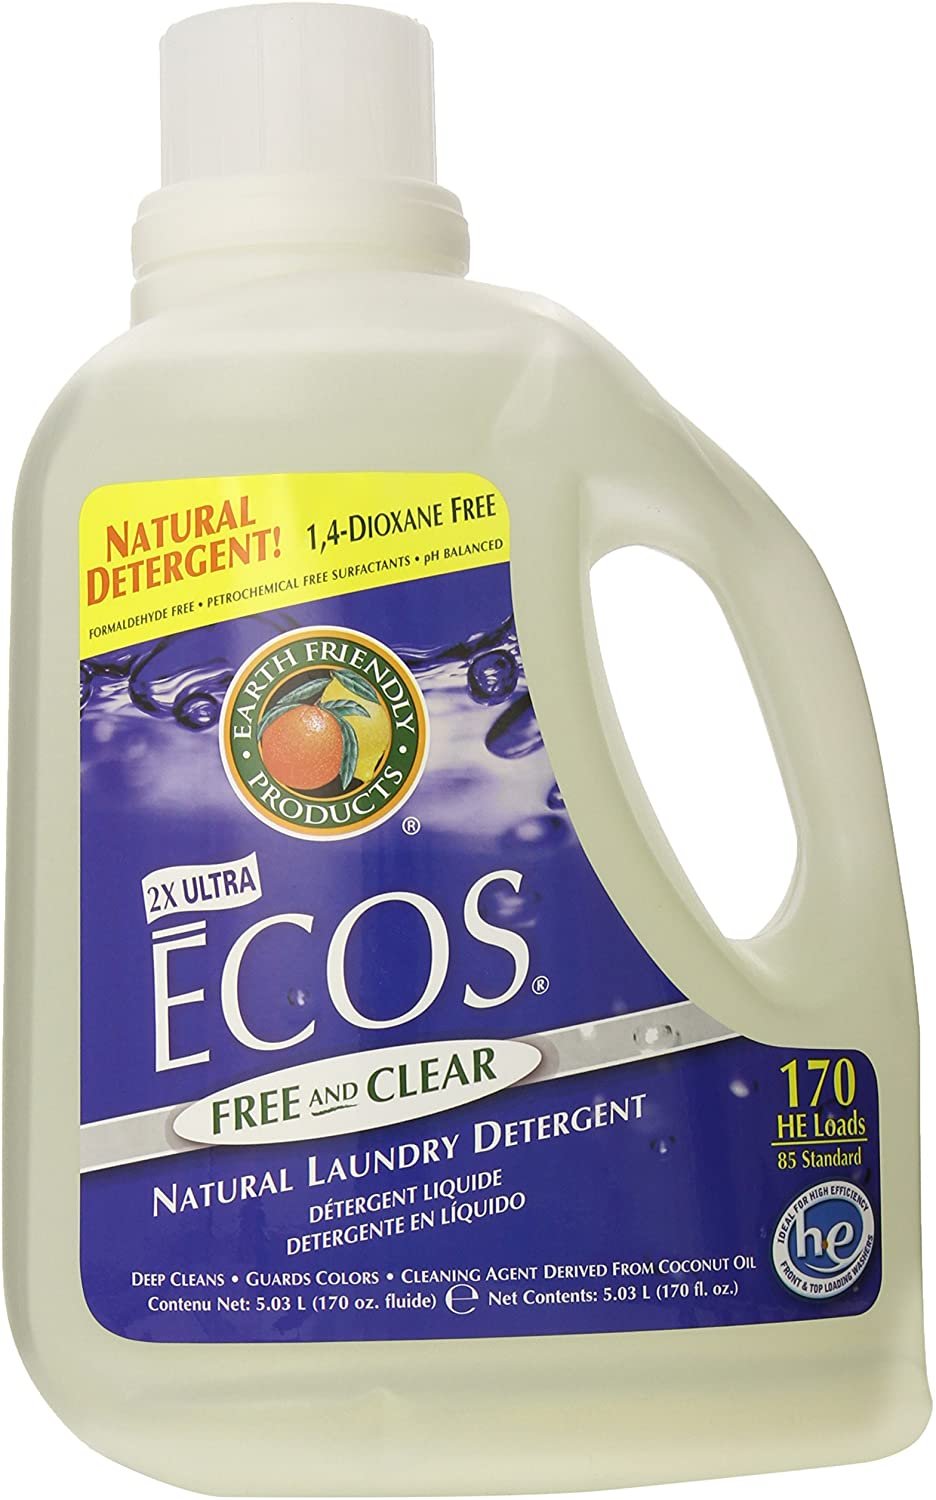 Liquid Laundry Detergent,with Built-in Fabric Softener, Free and Clear, Plant Drived, Hyper Allergenic, Pack of 6, 170 Ounce Per Pack